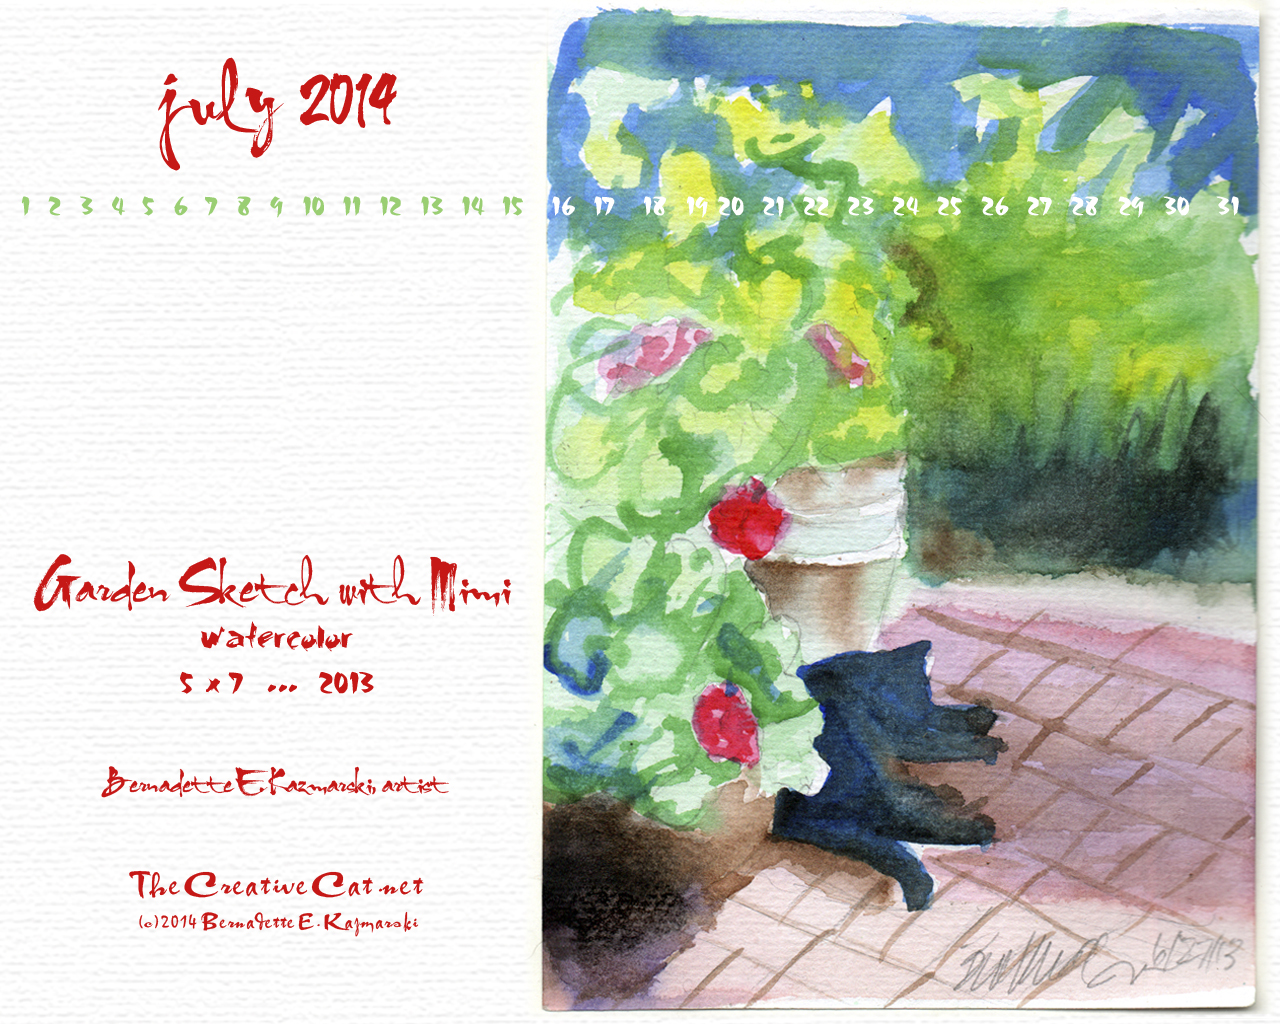 "Garden with Mimi" desktop calendar, 1280 x 1024 for square and laptop monitors